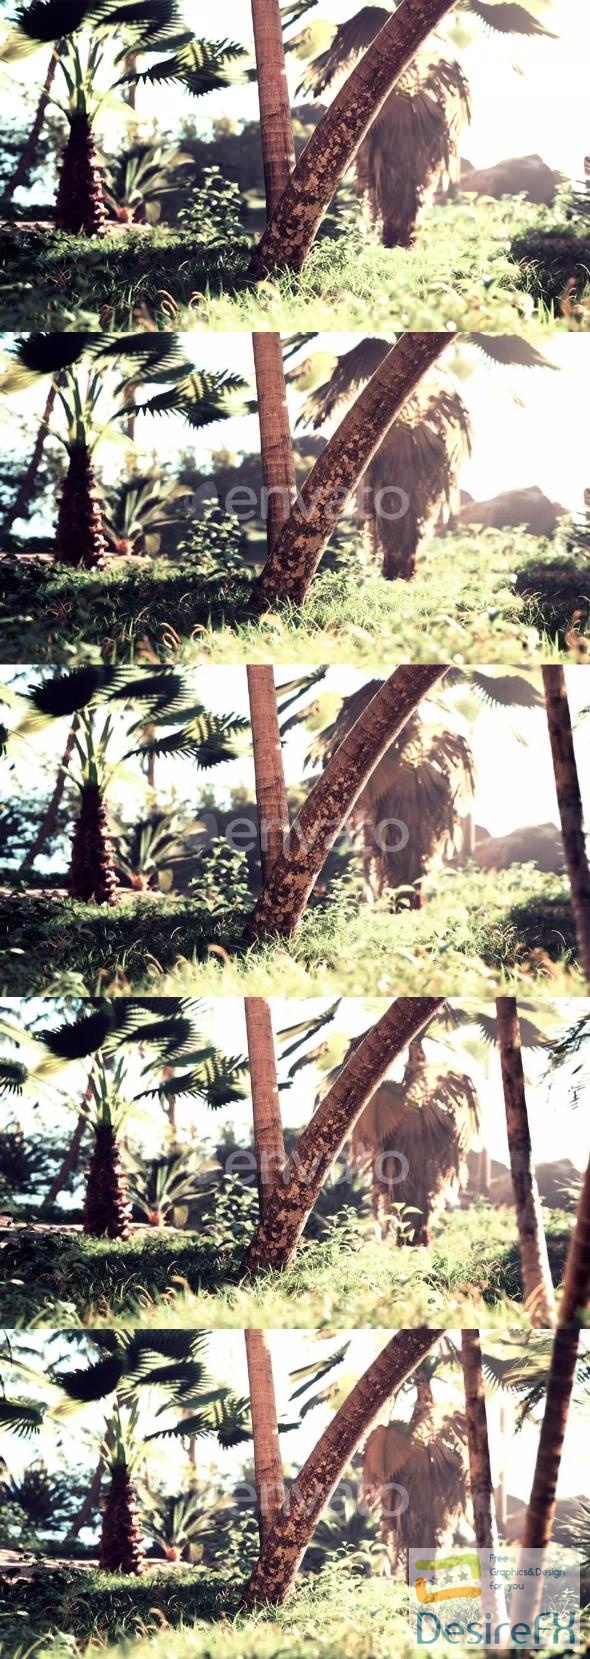 VideoHive Palm Oil Plantation and Morning Sunlight 47592662